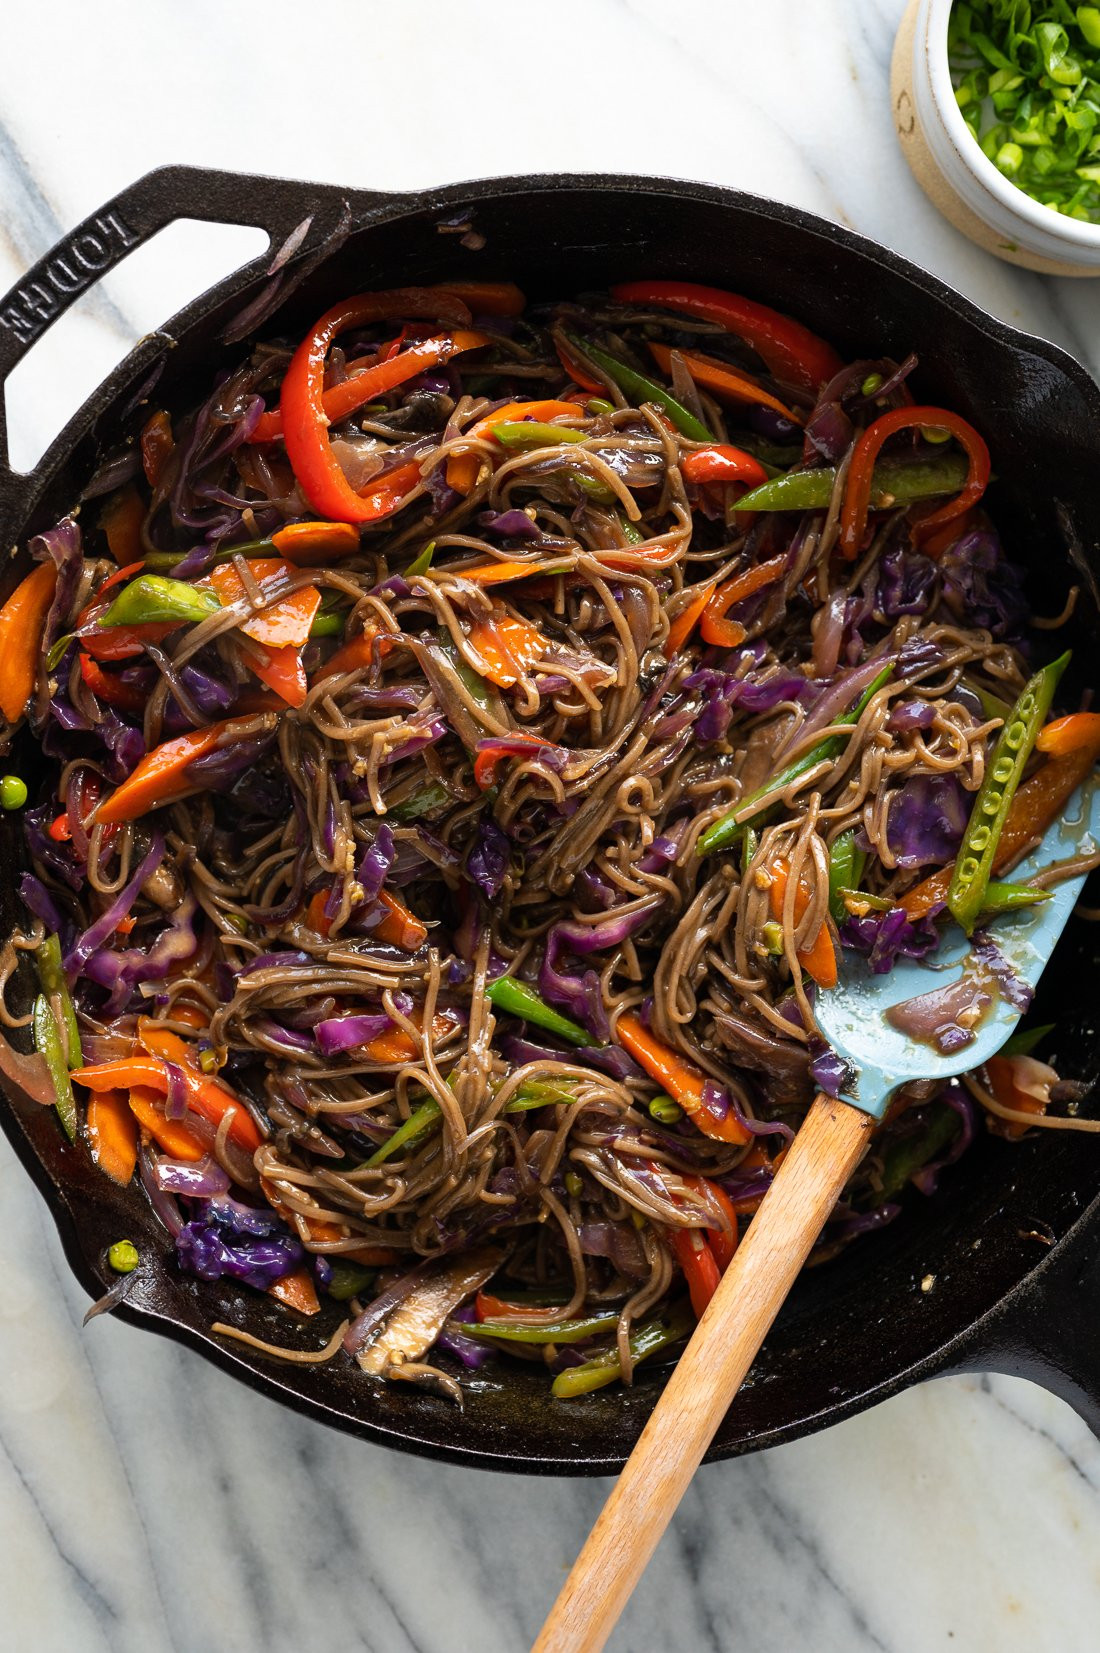 Vegetarian Noodle Recipes Stir Fry
 Cookie and Kate Whole Foods and Ve arian Recipe Blog